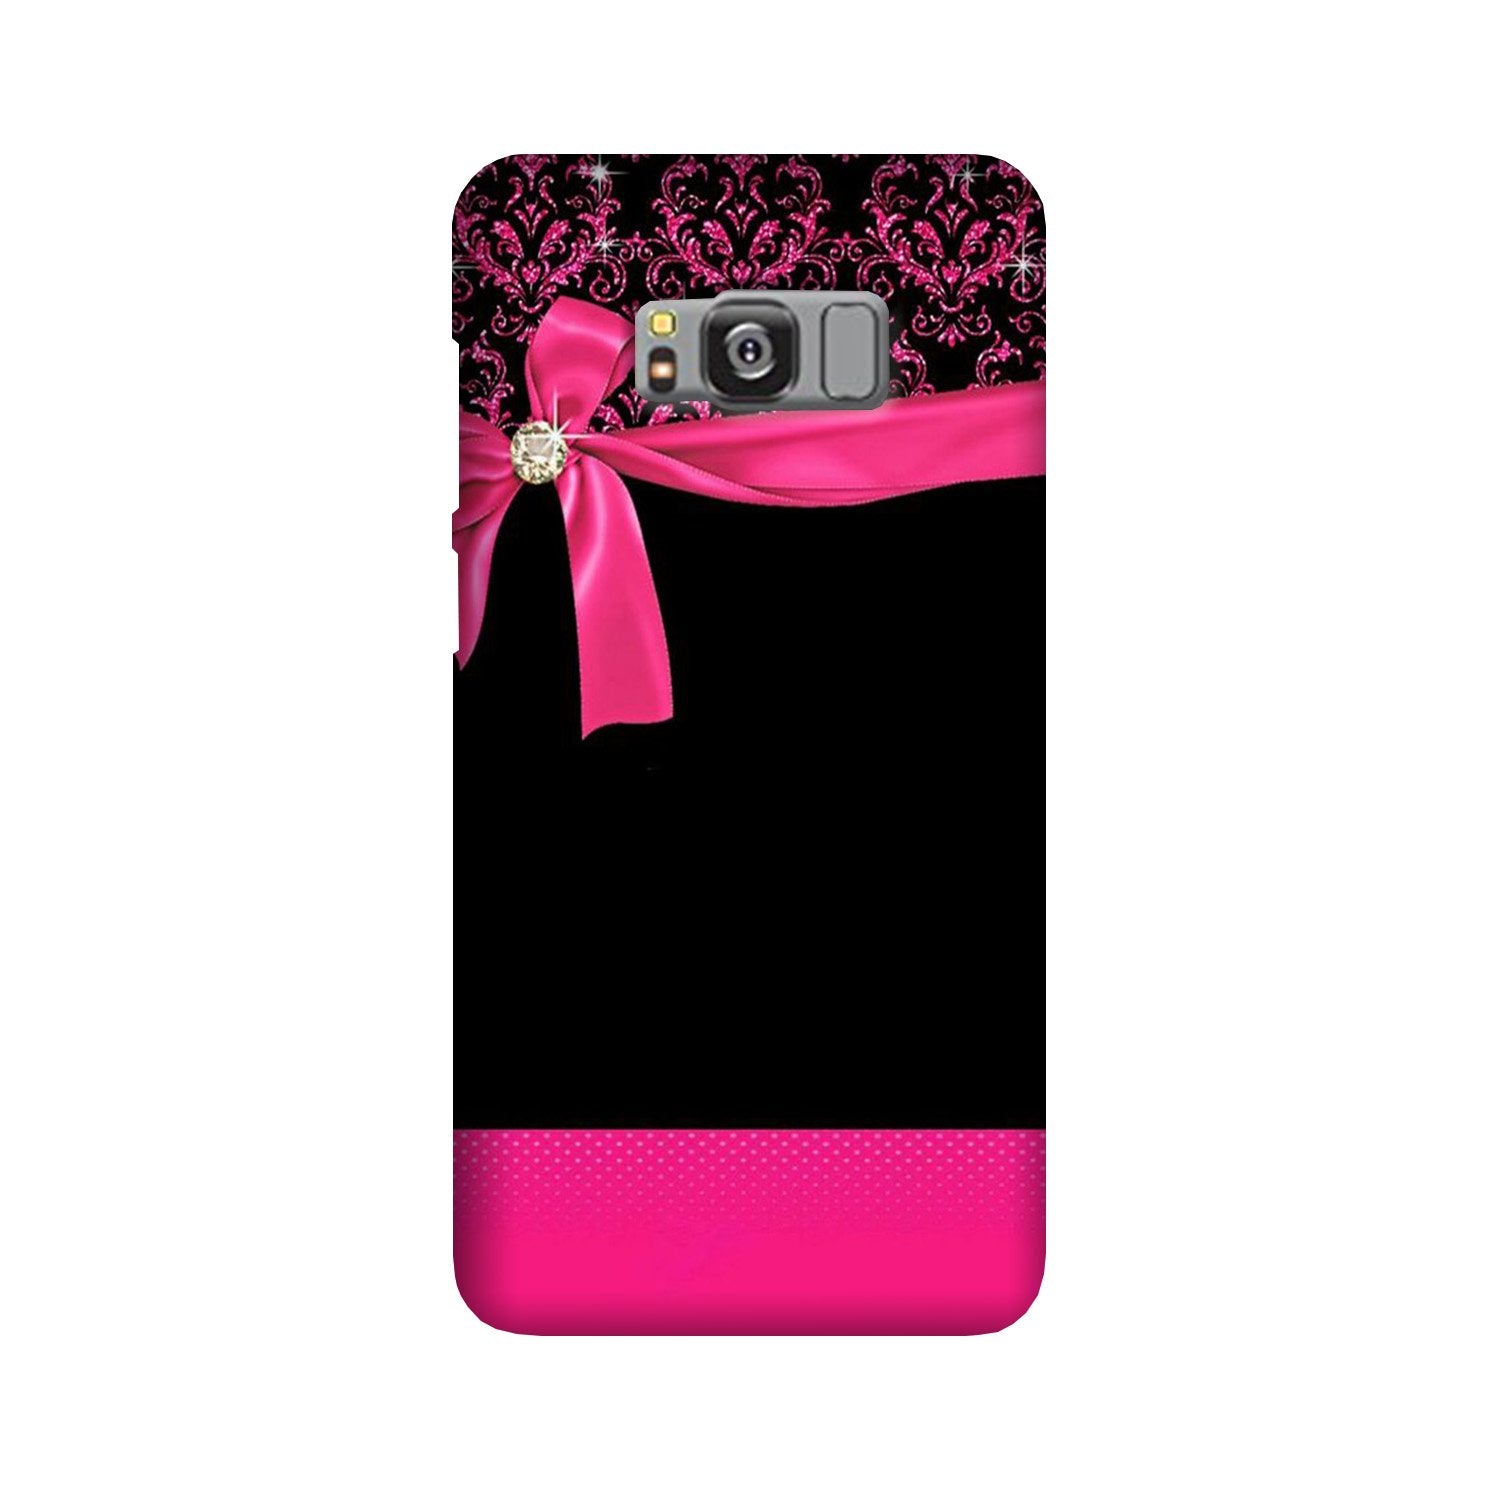 Gift Wrap4 Case for Galaxy S8